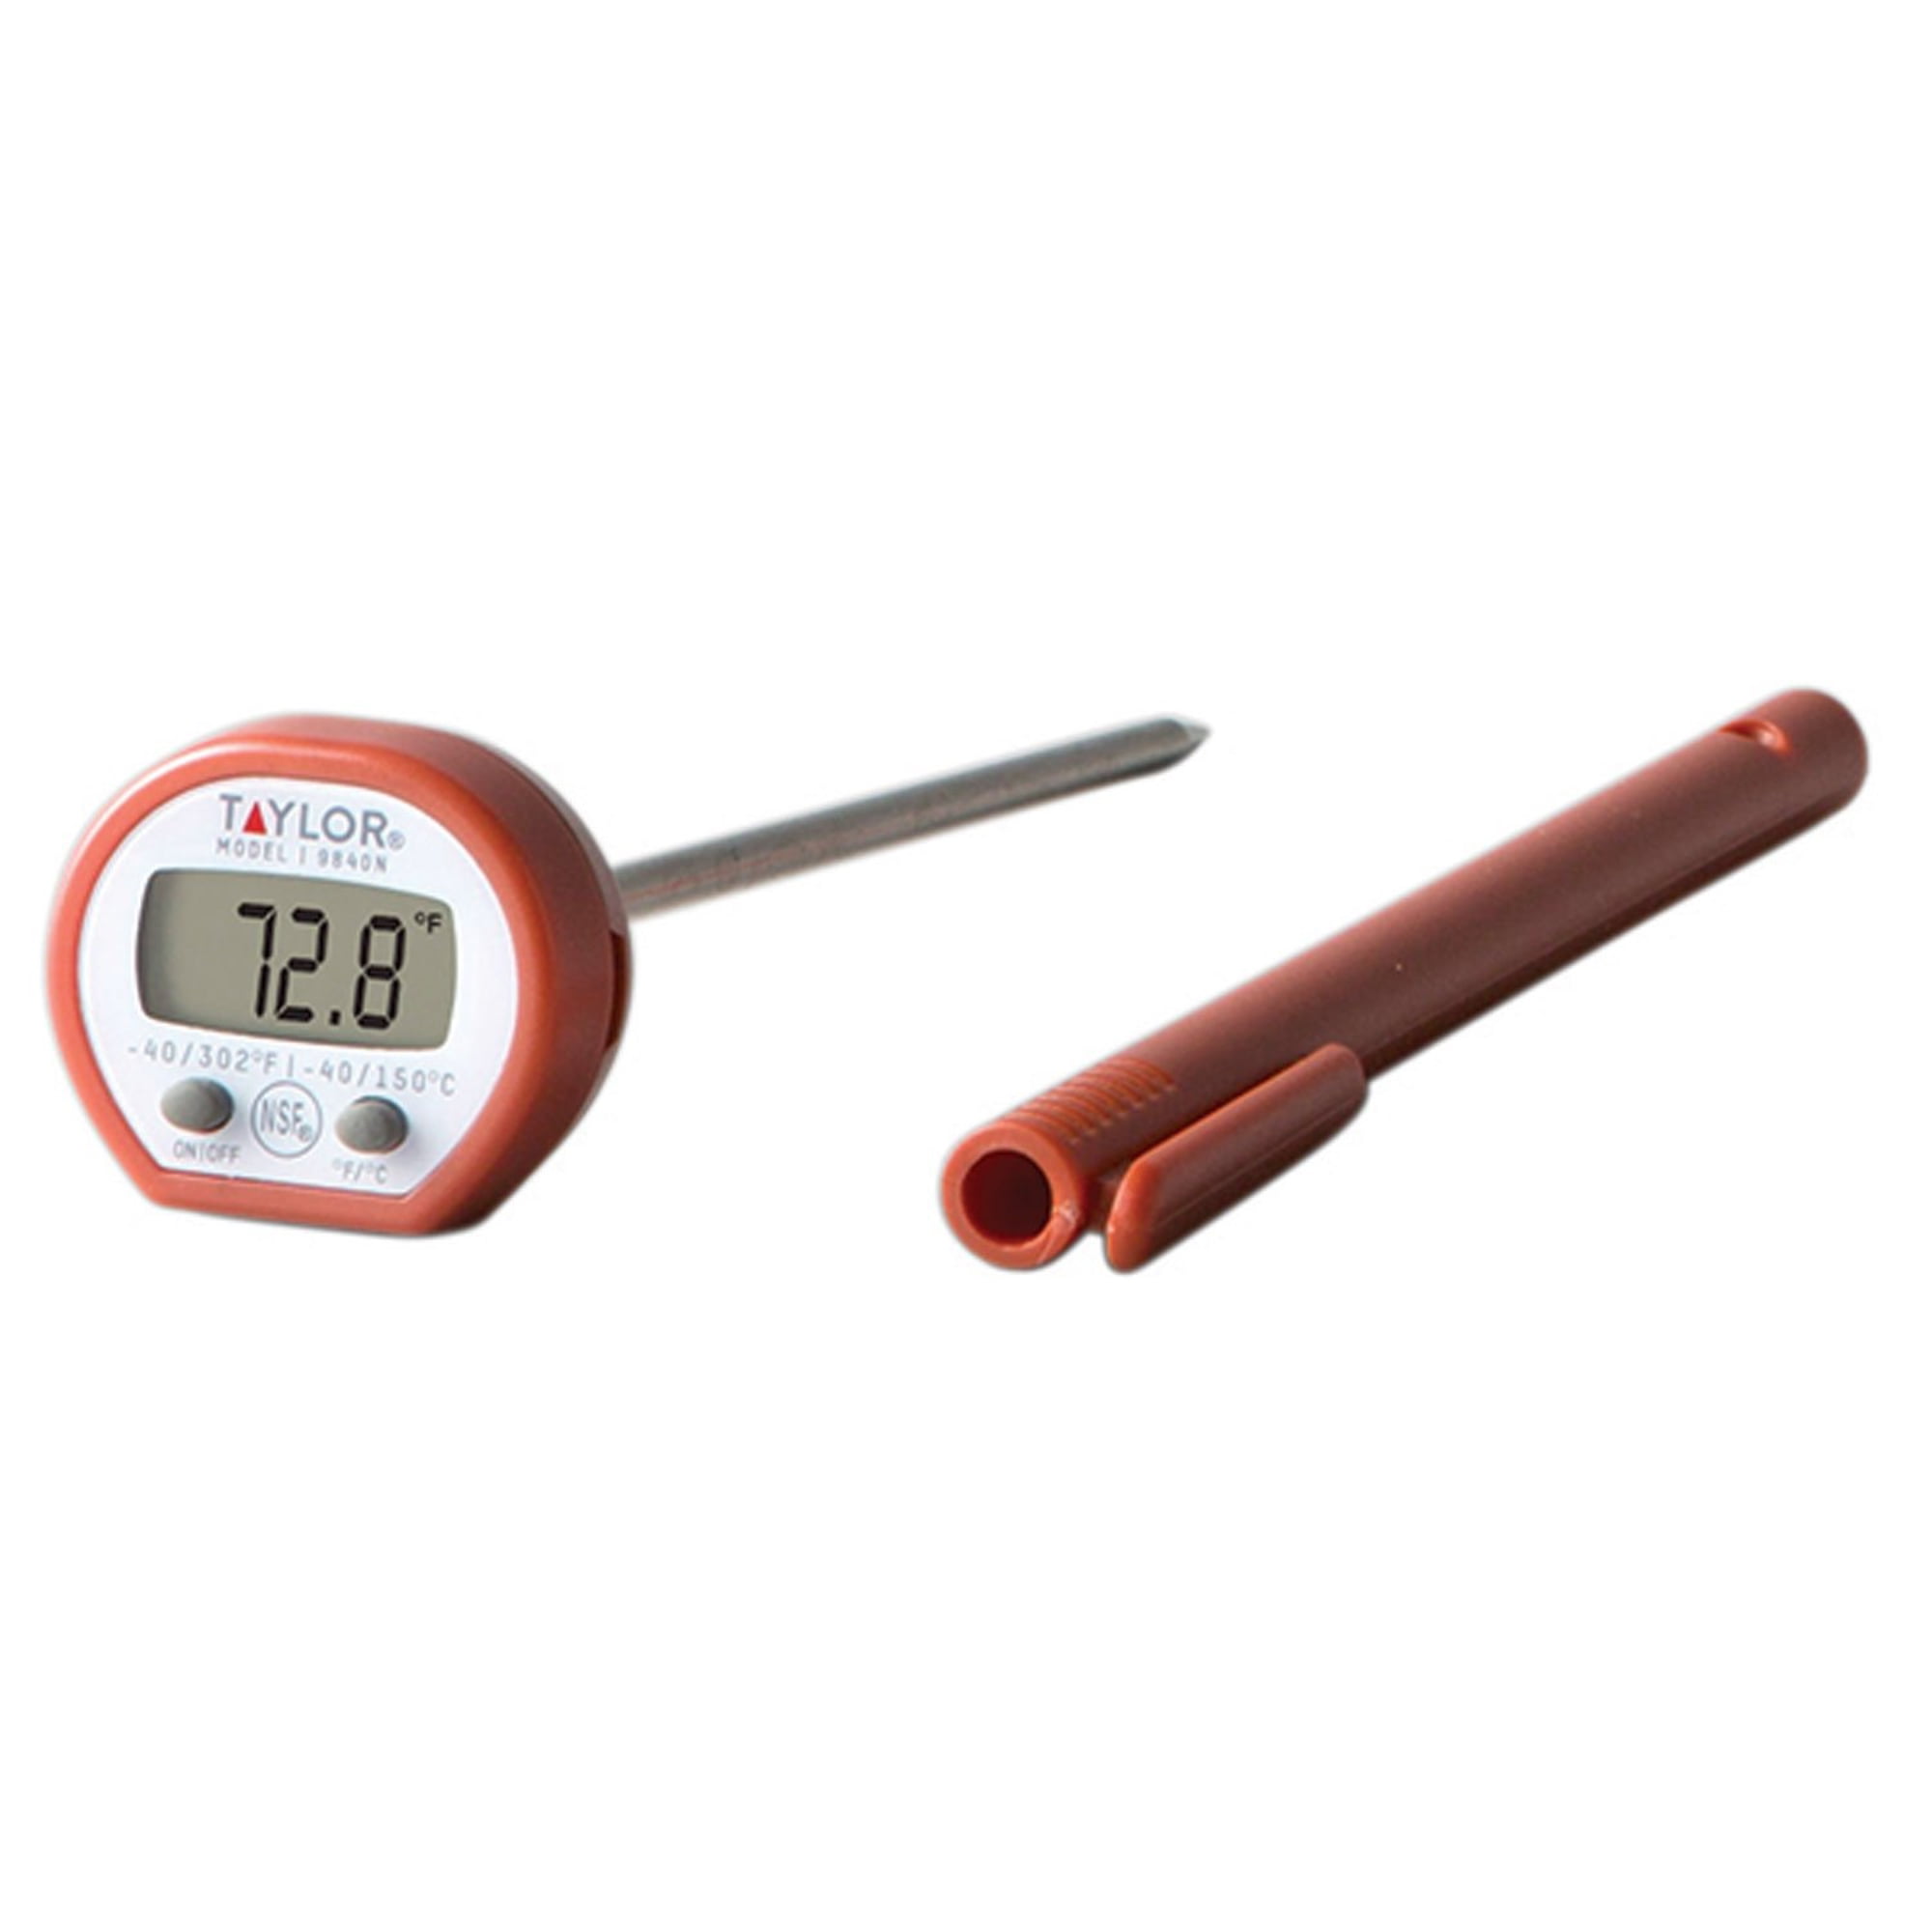 Taylor Digital Instant Read Thermometer Lollipop Style 